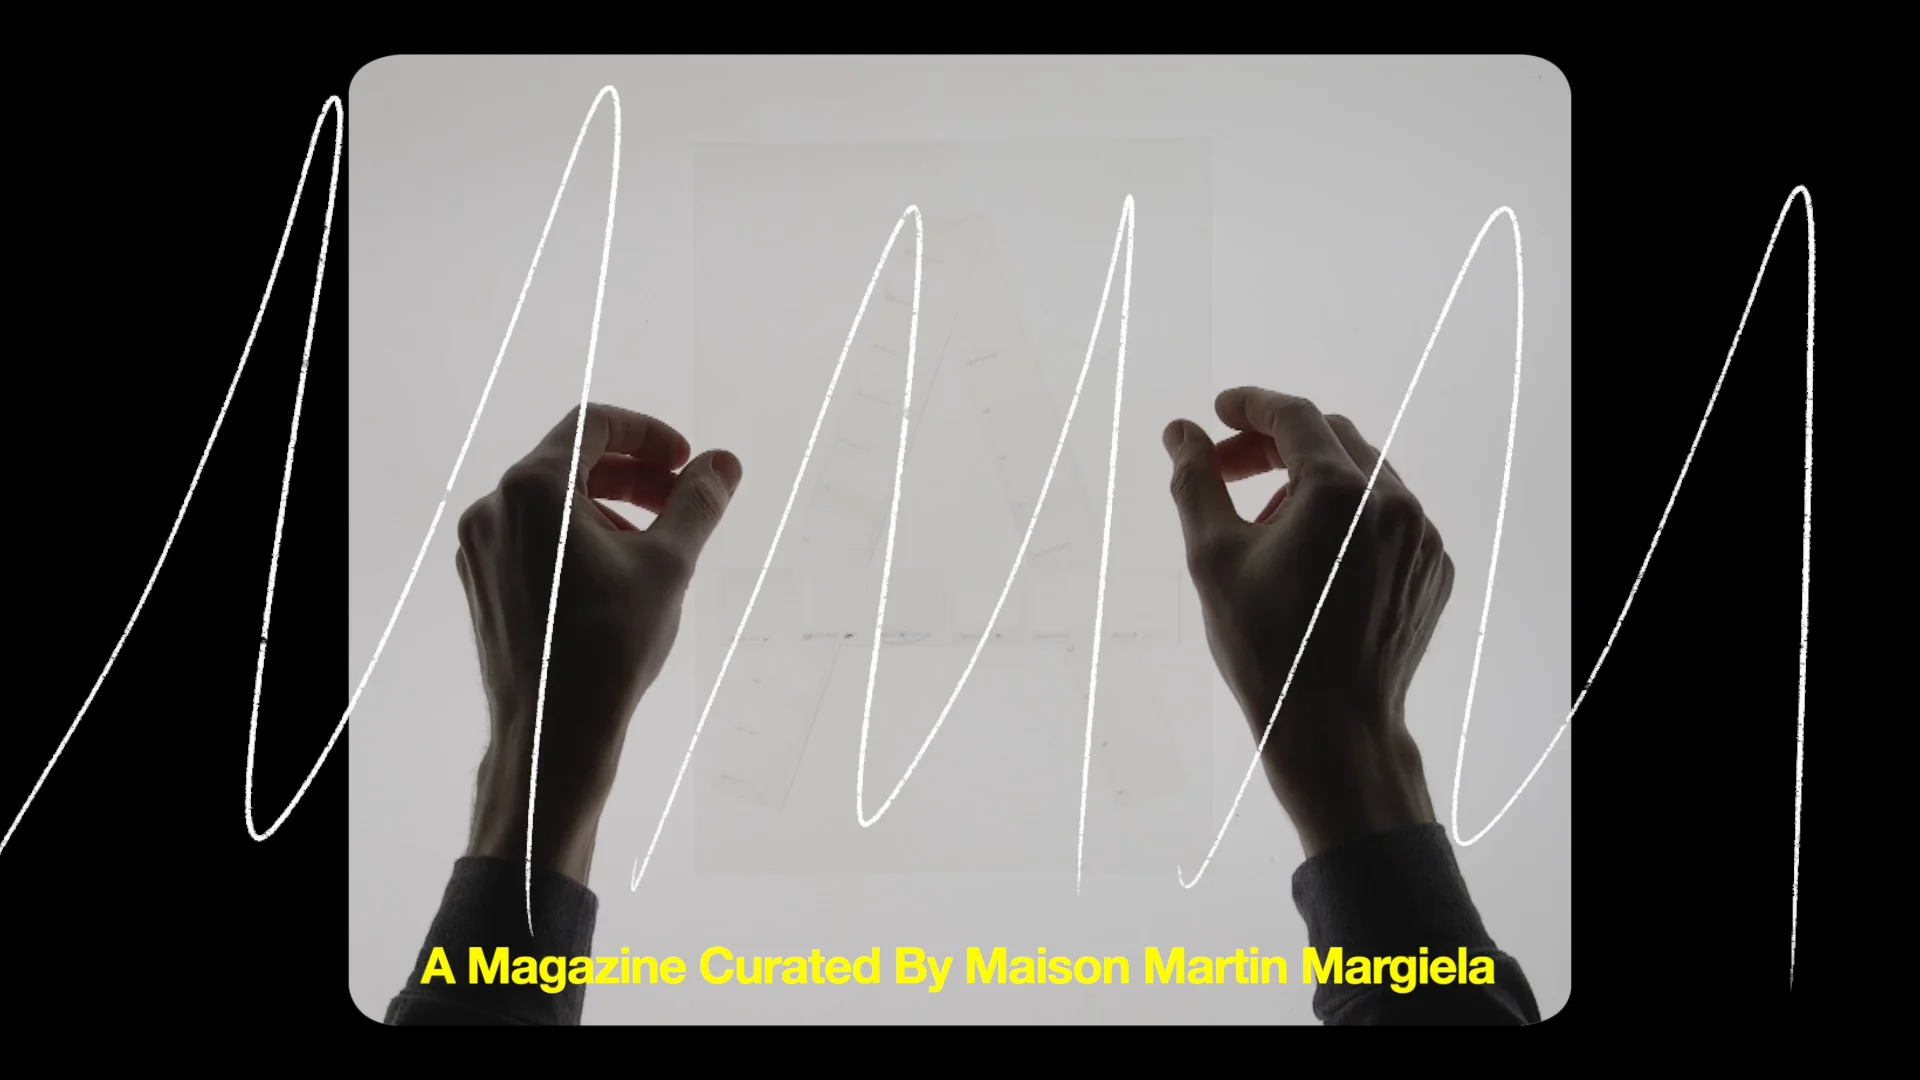 A Magazine Curated By Maison Martin Margiela (2004 - 2021)